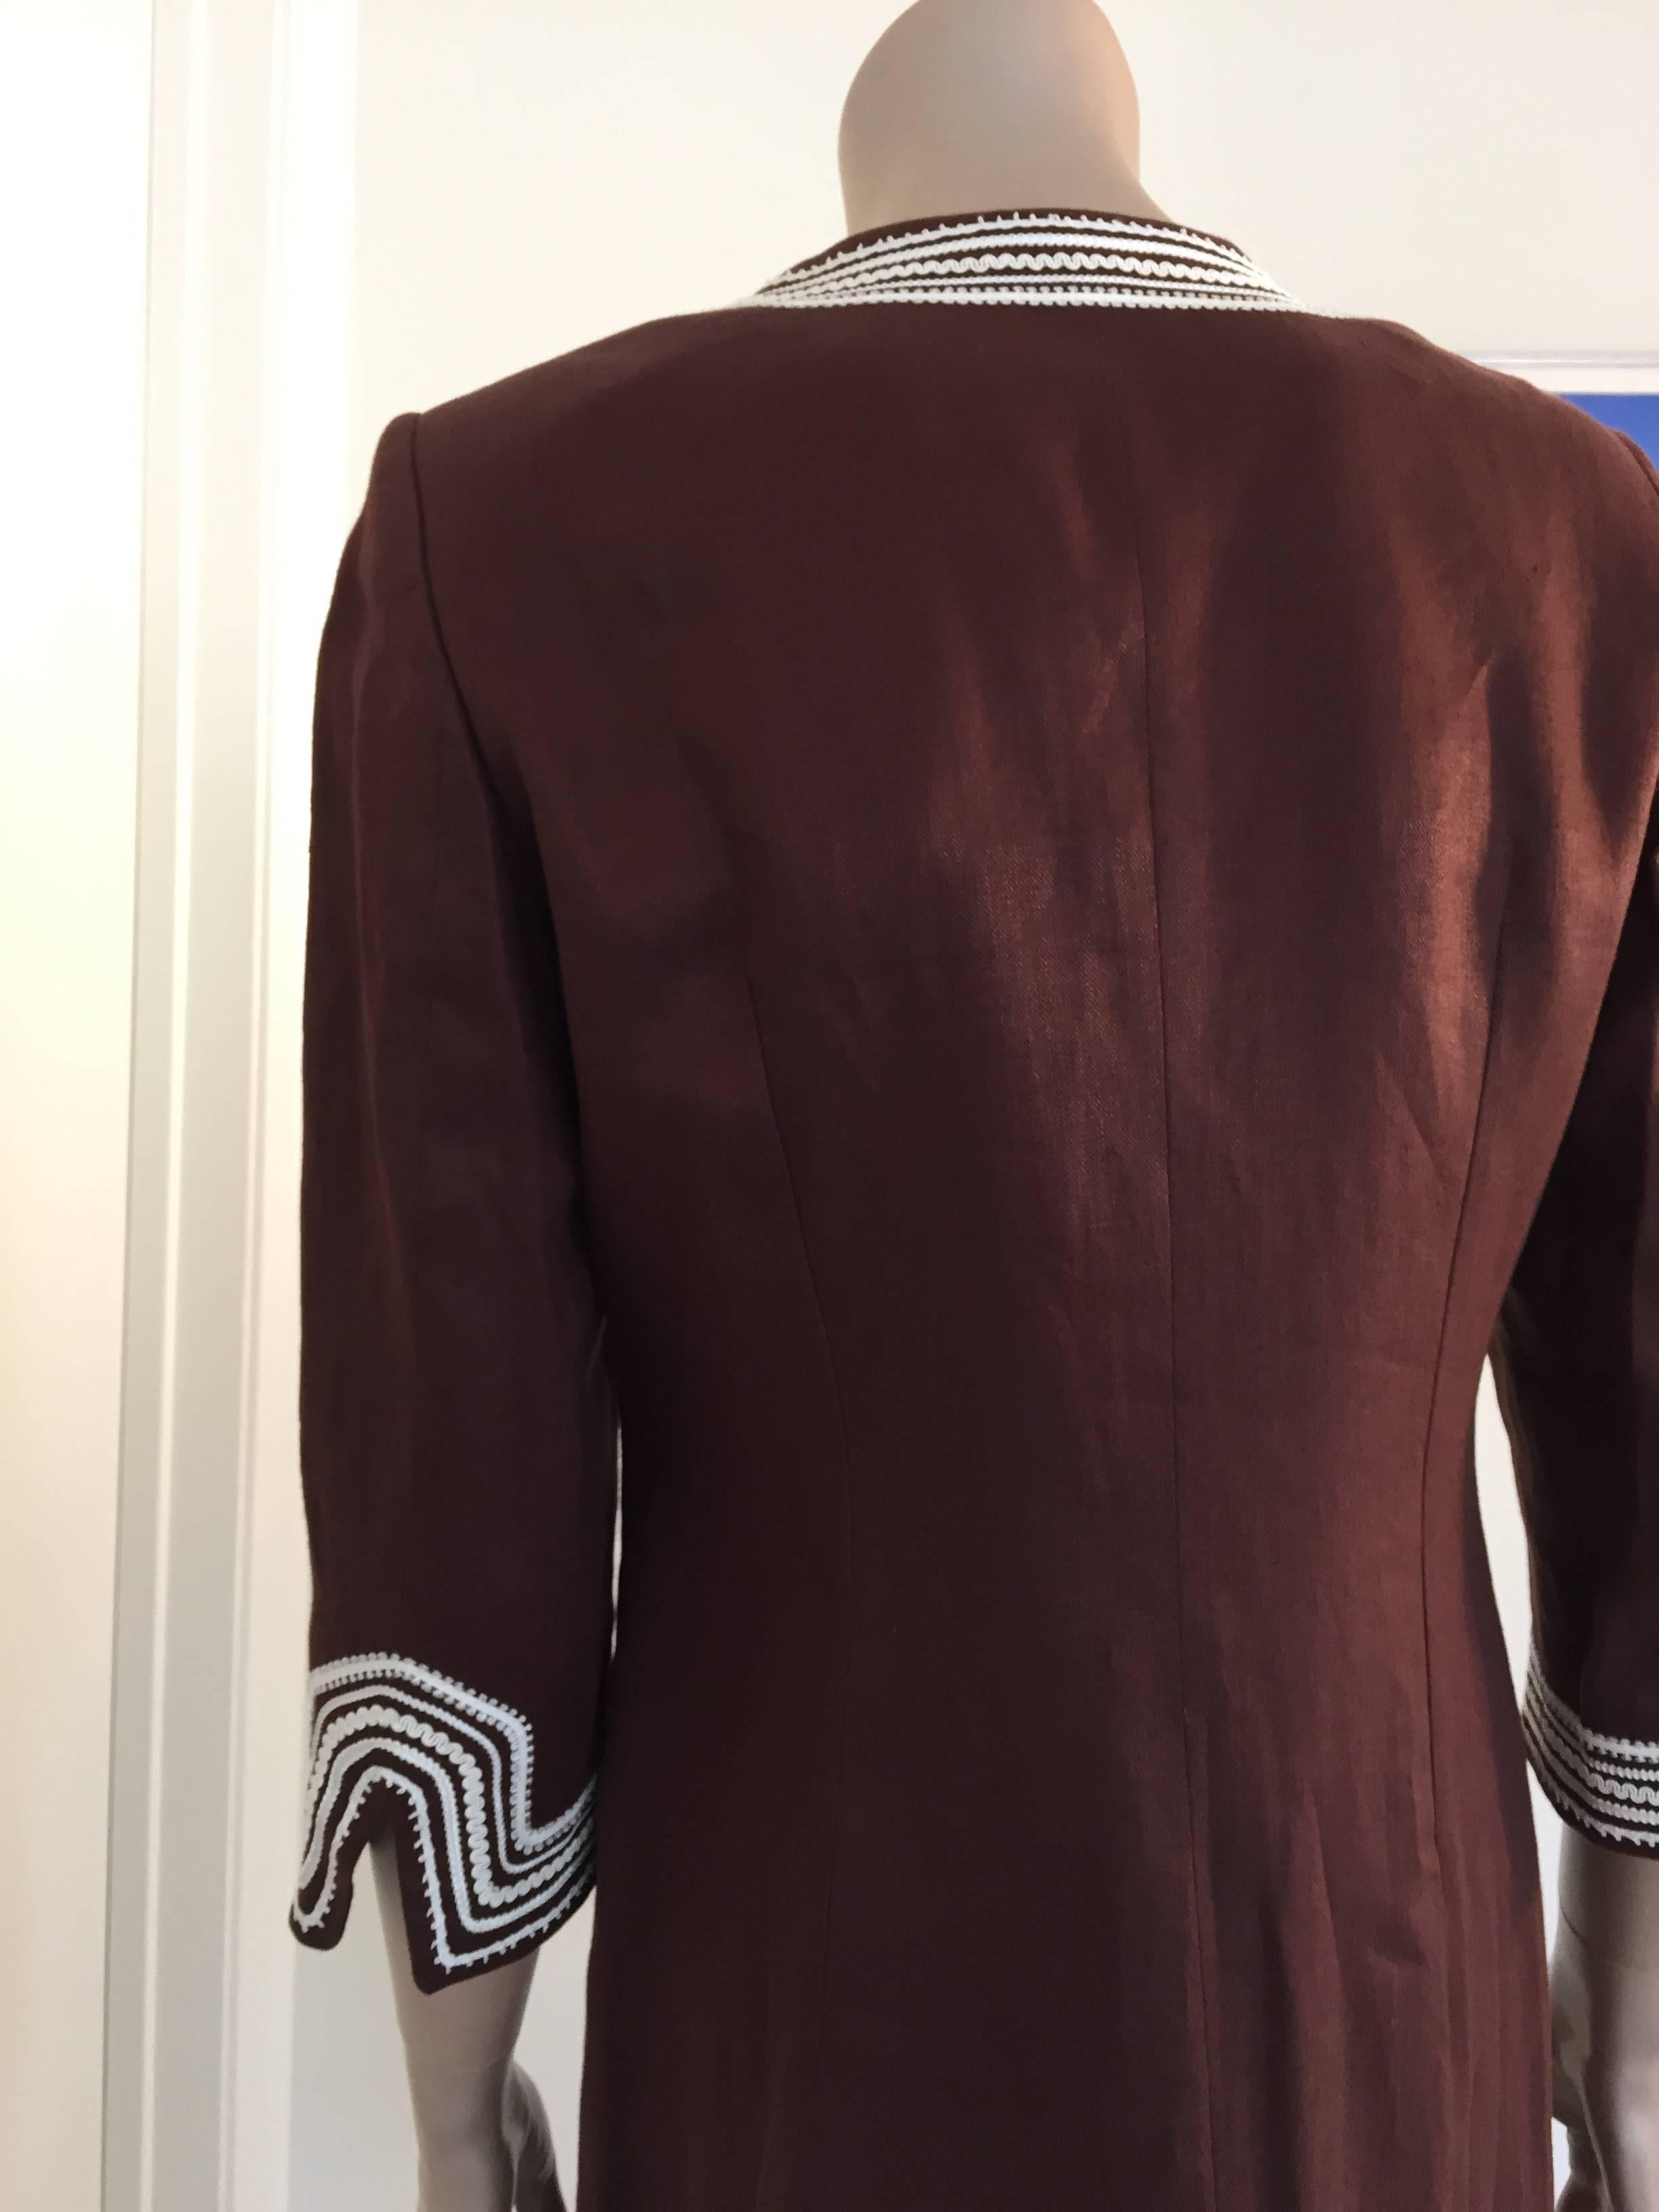 Escada Linen Chocolate Brown Caftan Dress Coat In Excellent Condition For Sale In North Hollywood, CA